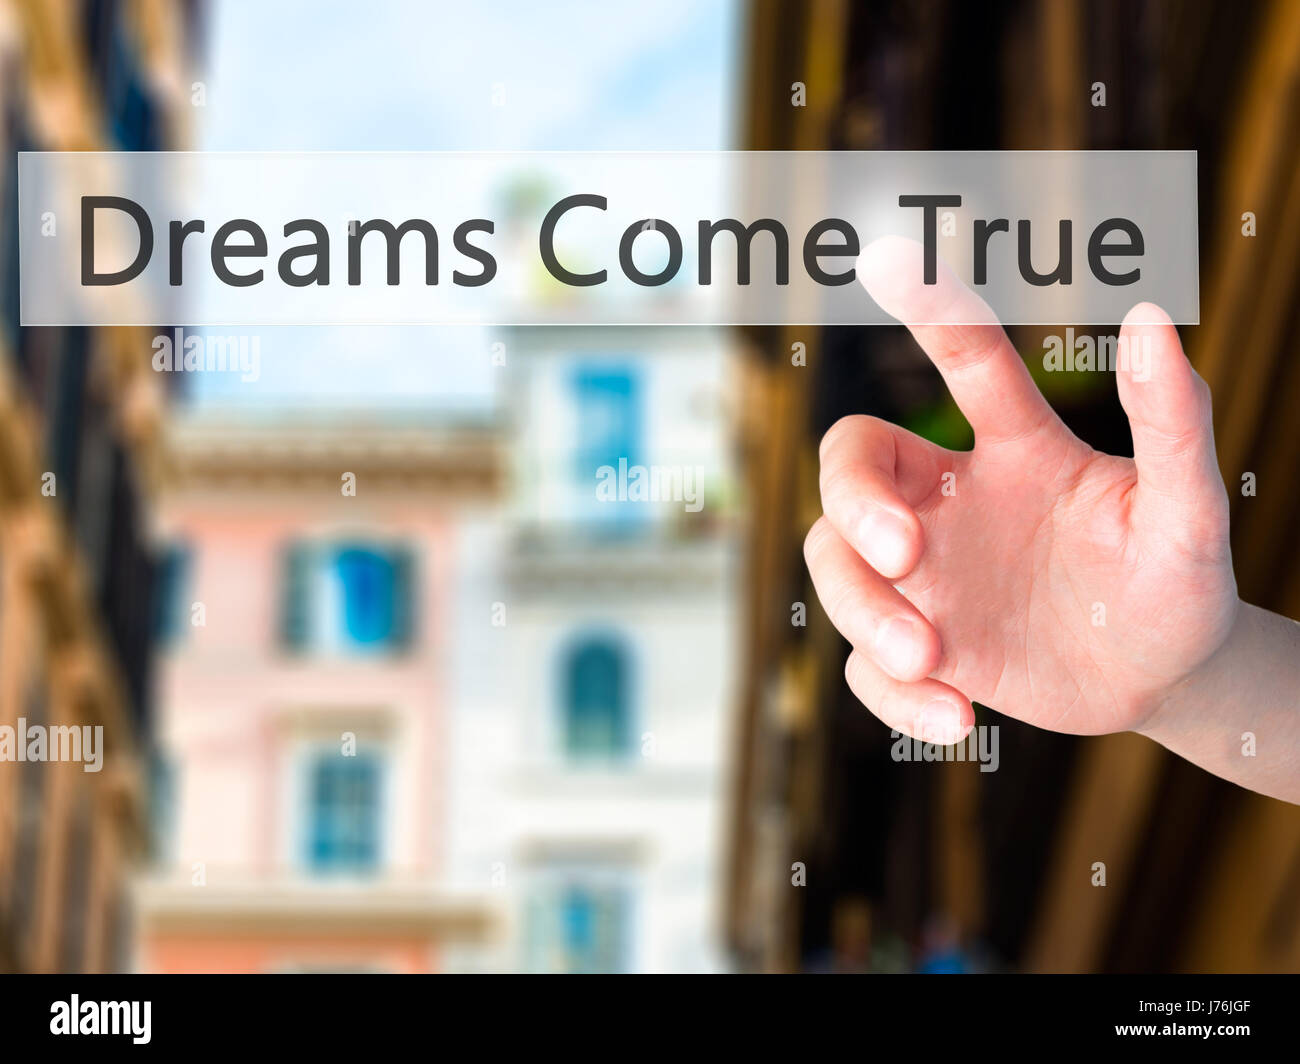 Dreams Come True - Hand pressing a button on blurred background concept . Business, technology, internet concept. Stock Photo Stock Photo